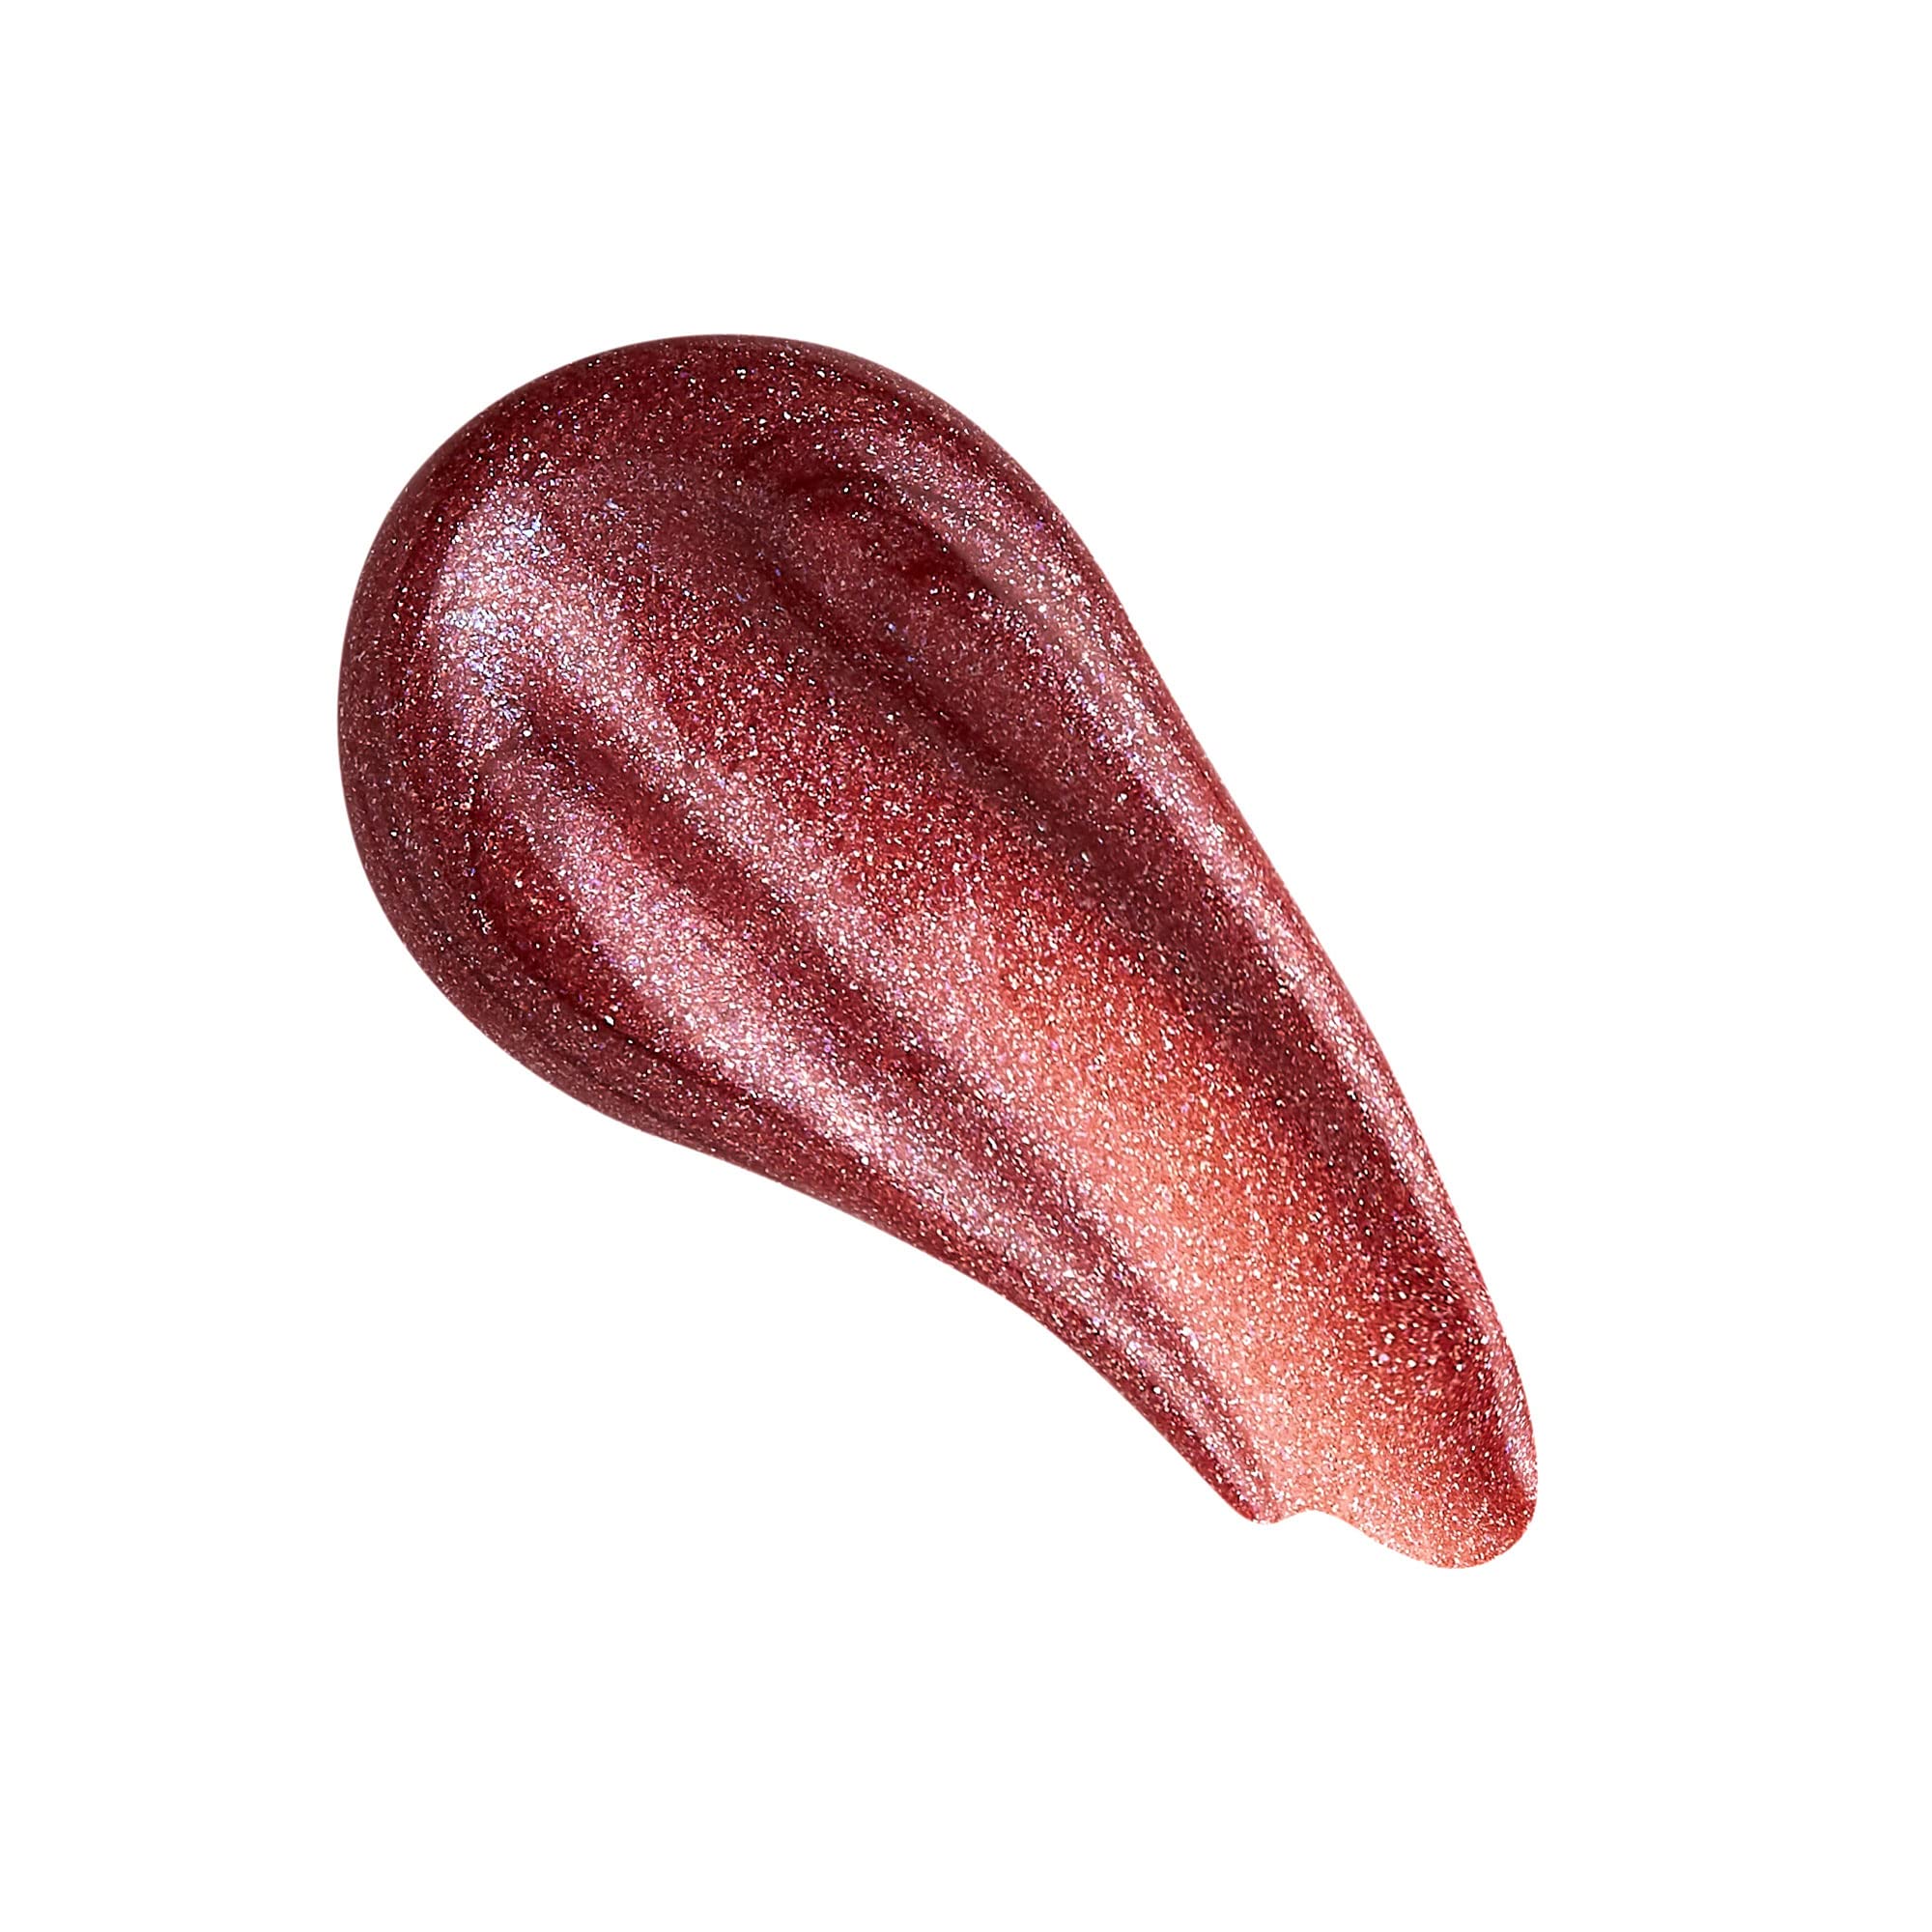 Revolution Shimmer Bomb Lip Gloss, Lip Tint Infused With Vitamin E, Shimmery Finish, Comes In 6 Colors, Distortion